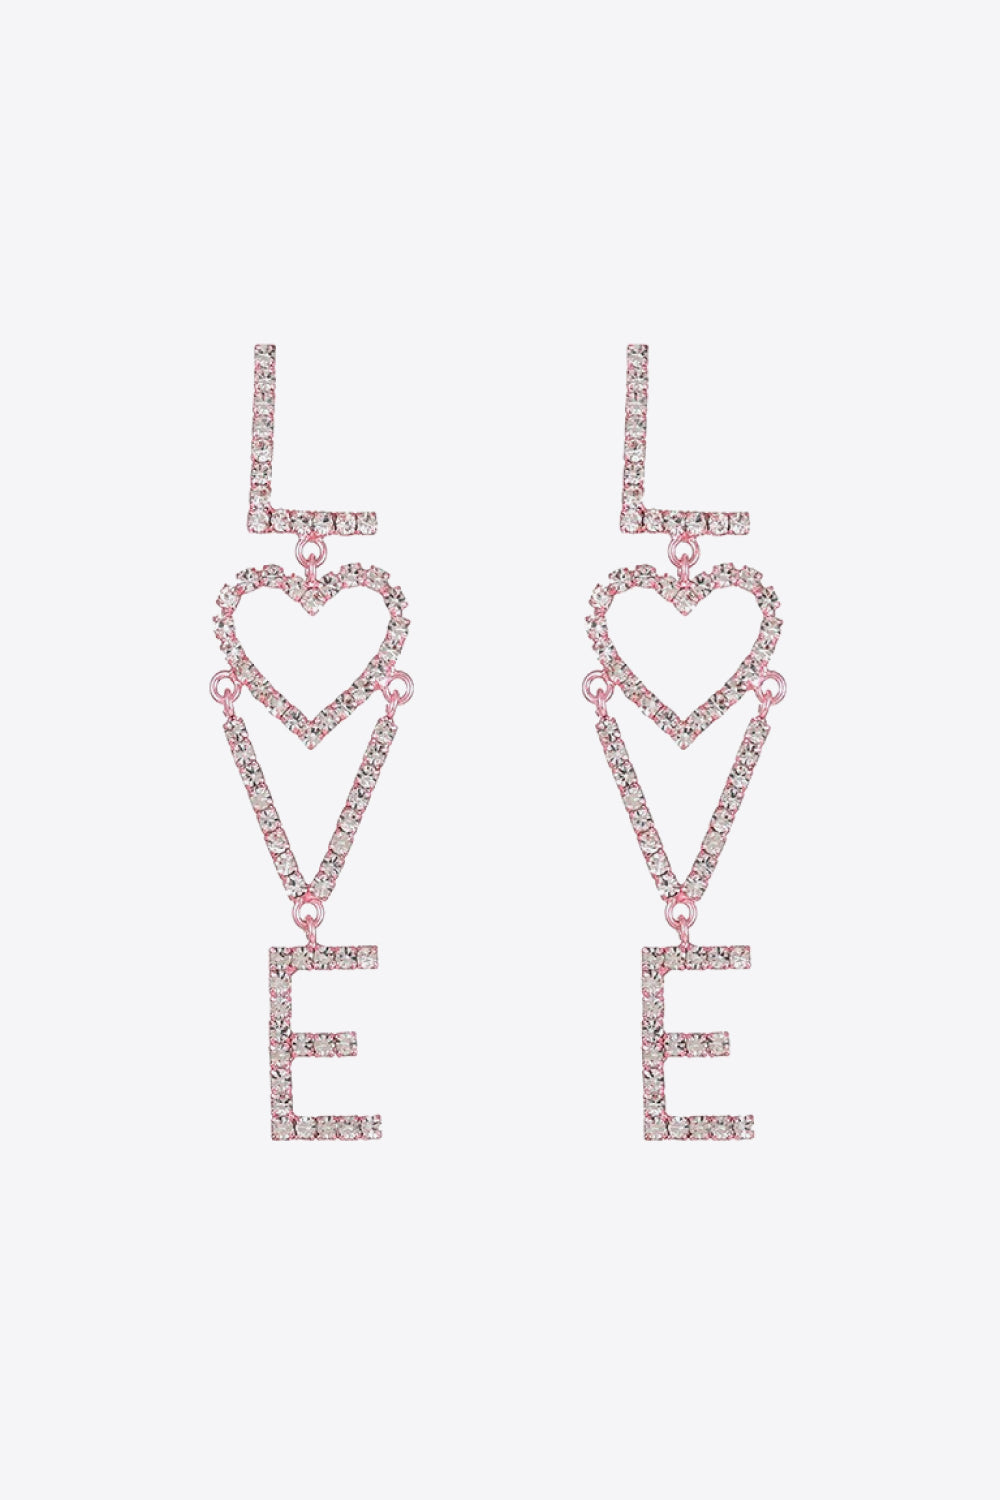 Blush Pink One Size - LOVE Glass Stone Zinc Alloy Earrings - 2 styles - earrings at TFC&H Co.